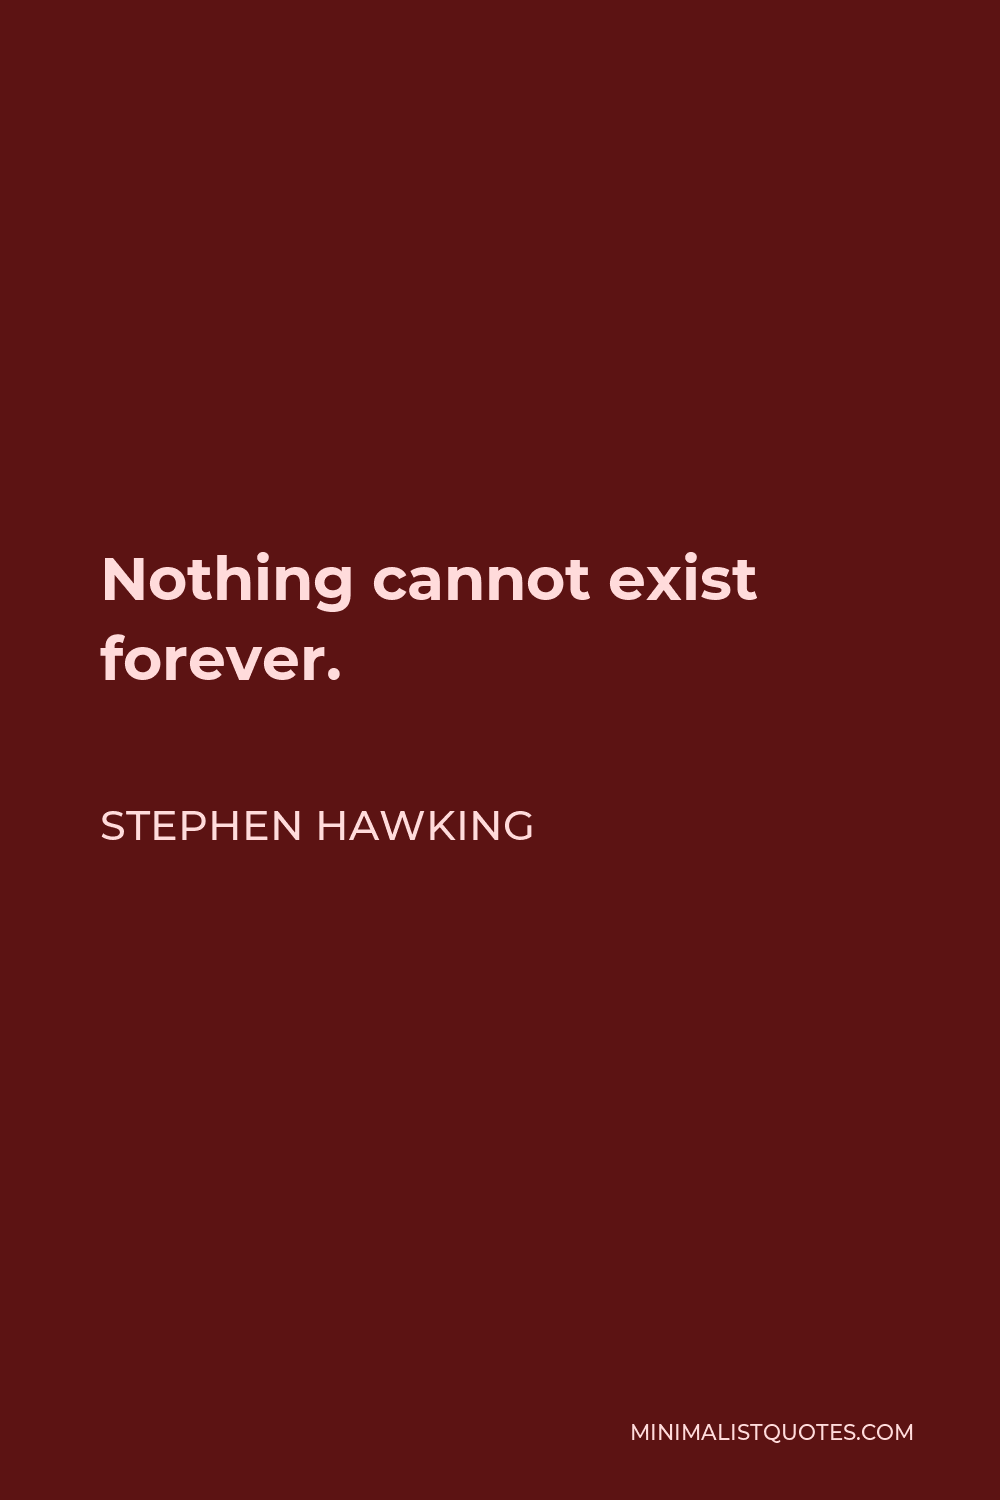 Stephen Hawking Quote - Nothing cannot exist forever.